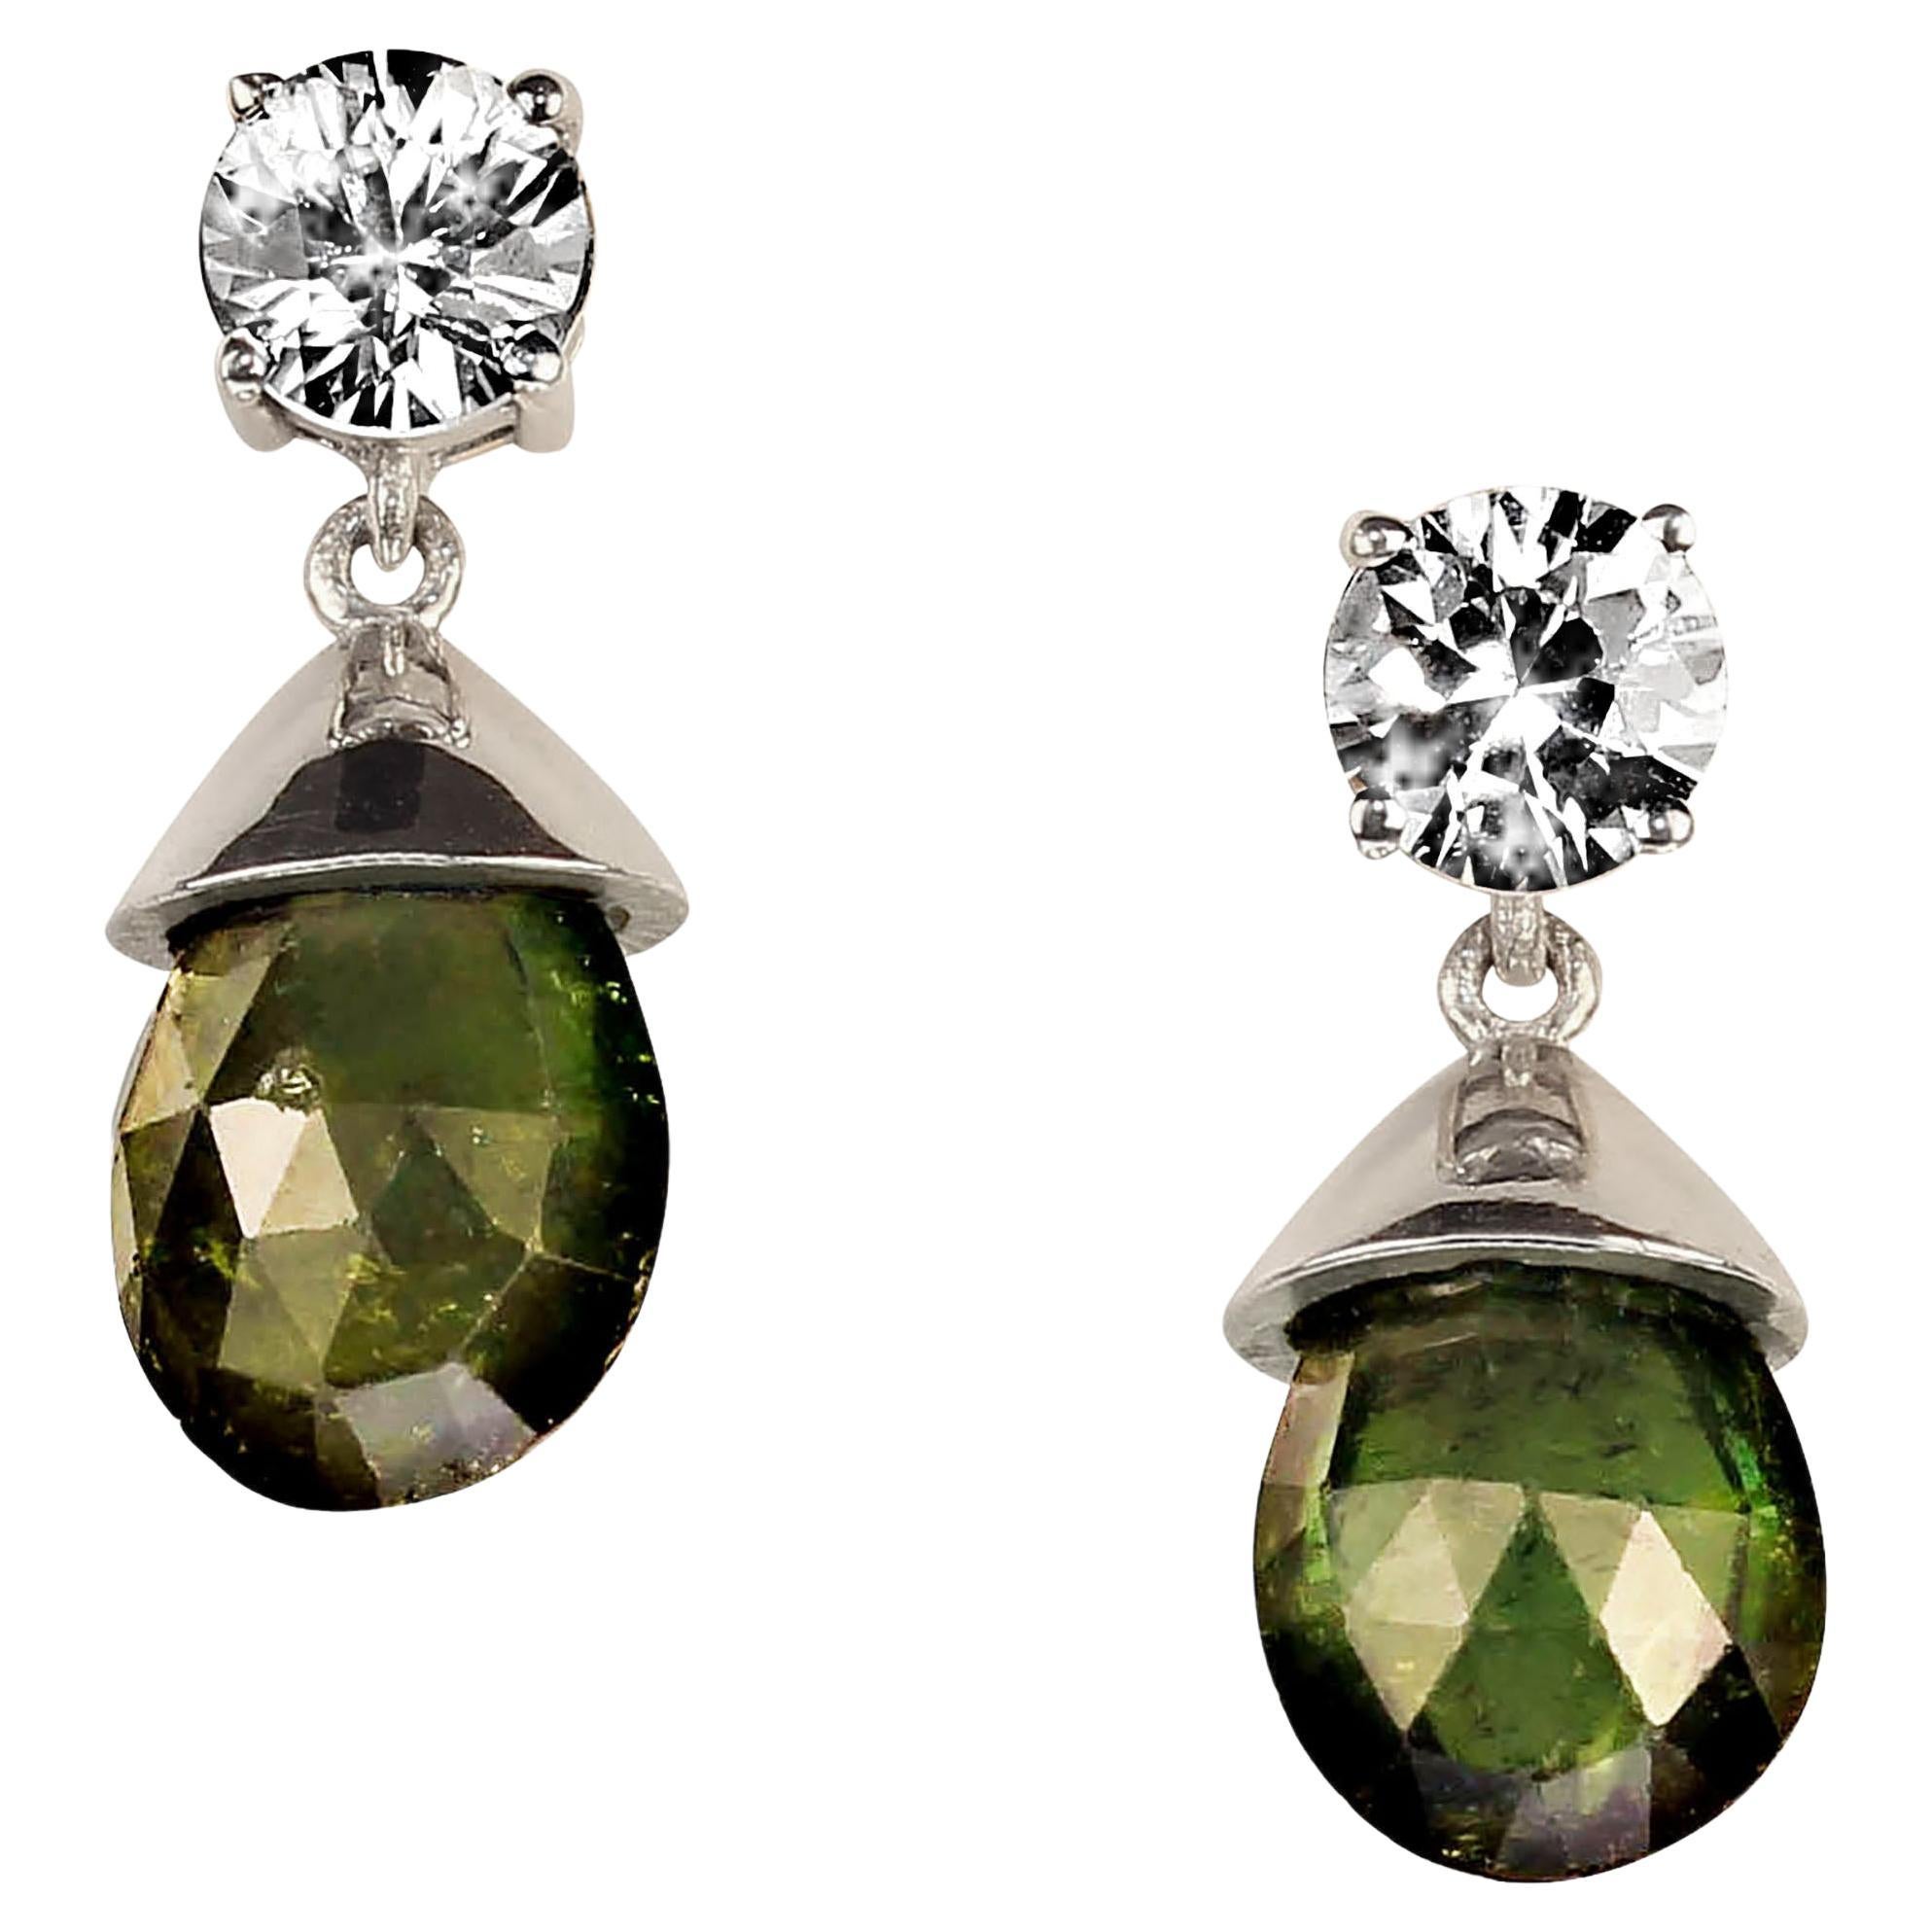 Sparkling Zircons and green Tourmaline earrings.  These lovely gemstones are set in Sterling Silver, with post backs.  The zircons weigh 2.48ct, and are 6MM.  The green briolette Tourmalines weigh 8.98 ct. The earrings have a drop of 0.75 inches. 